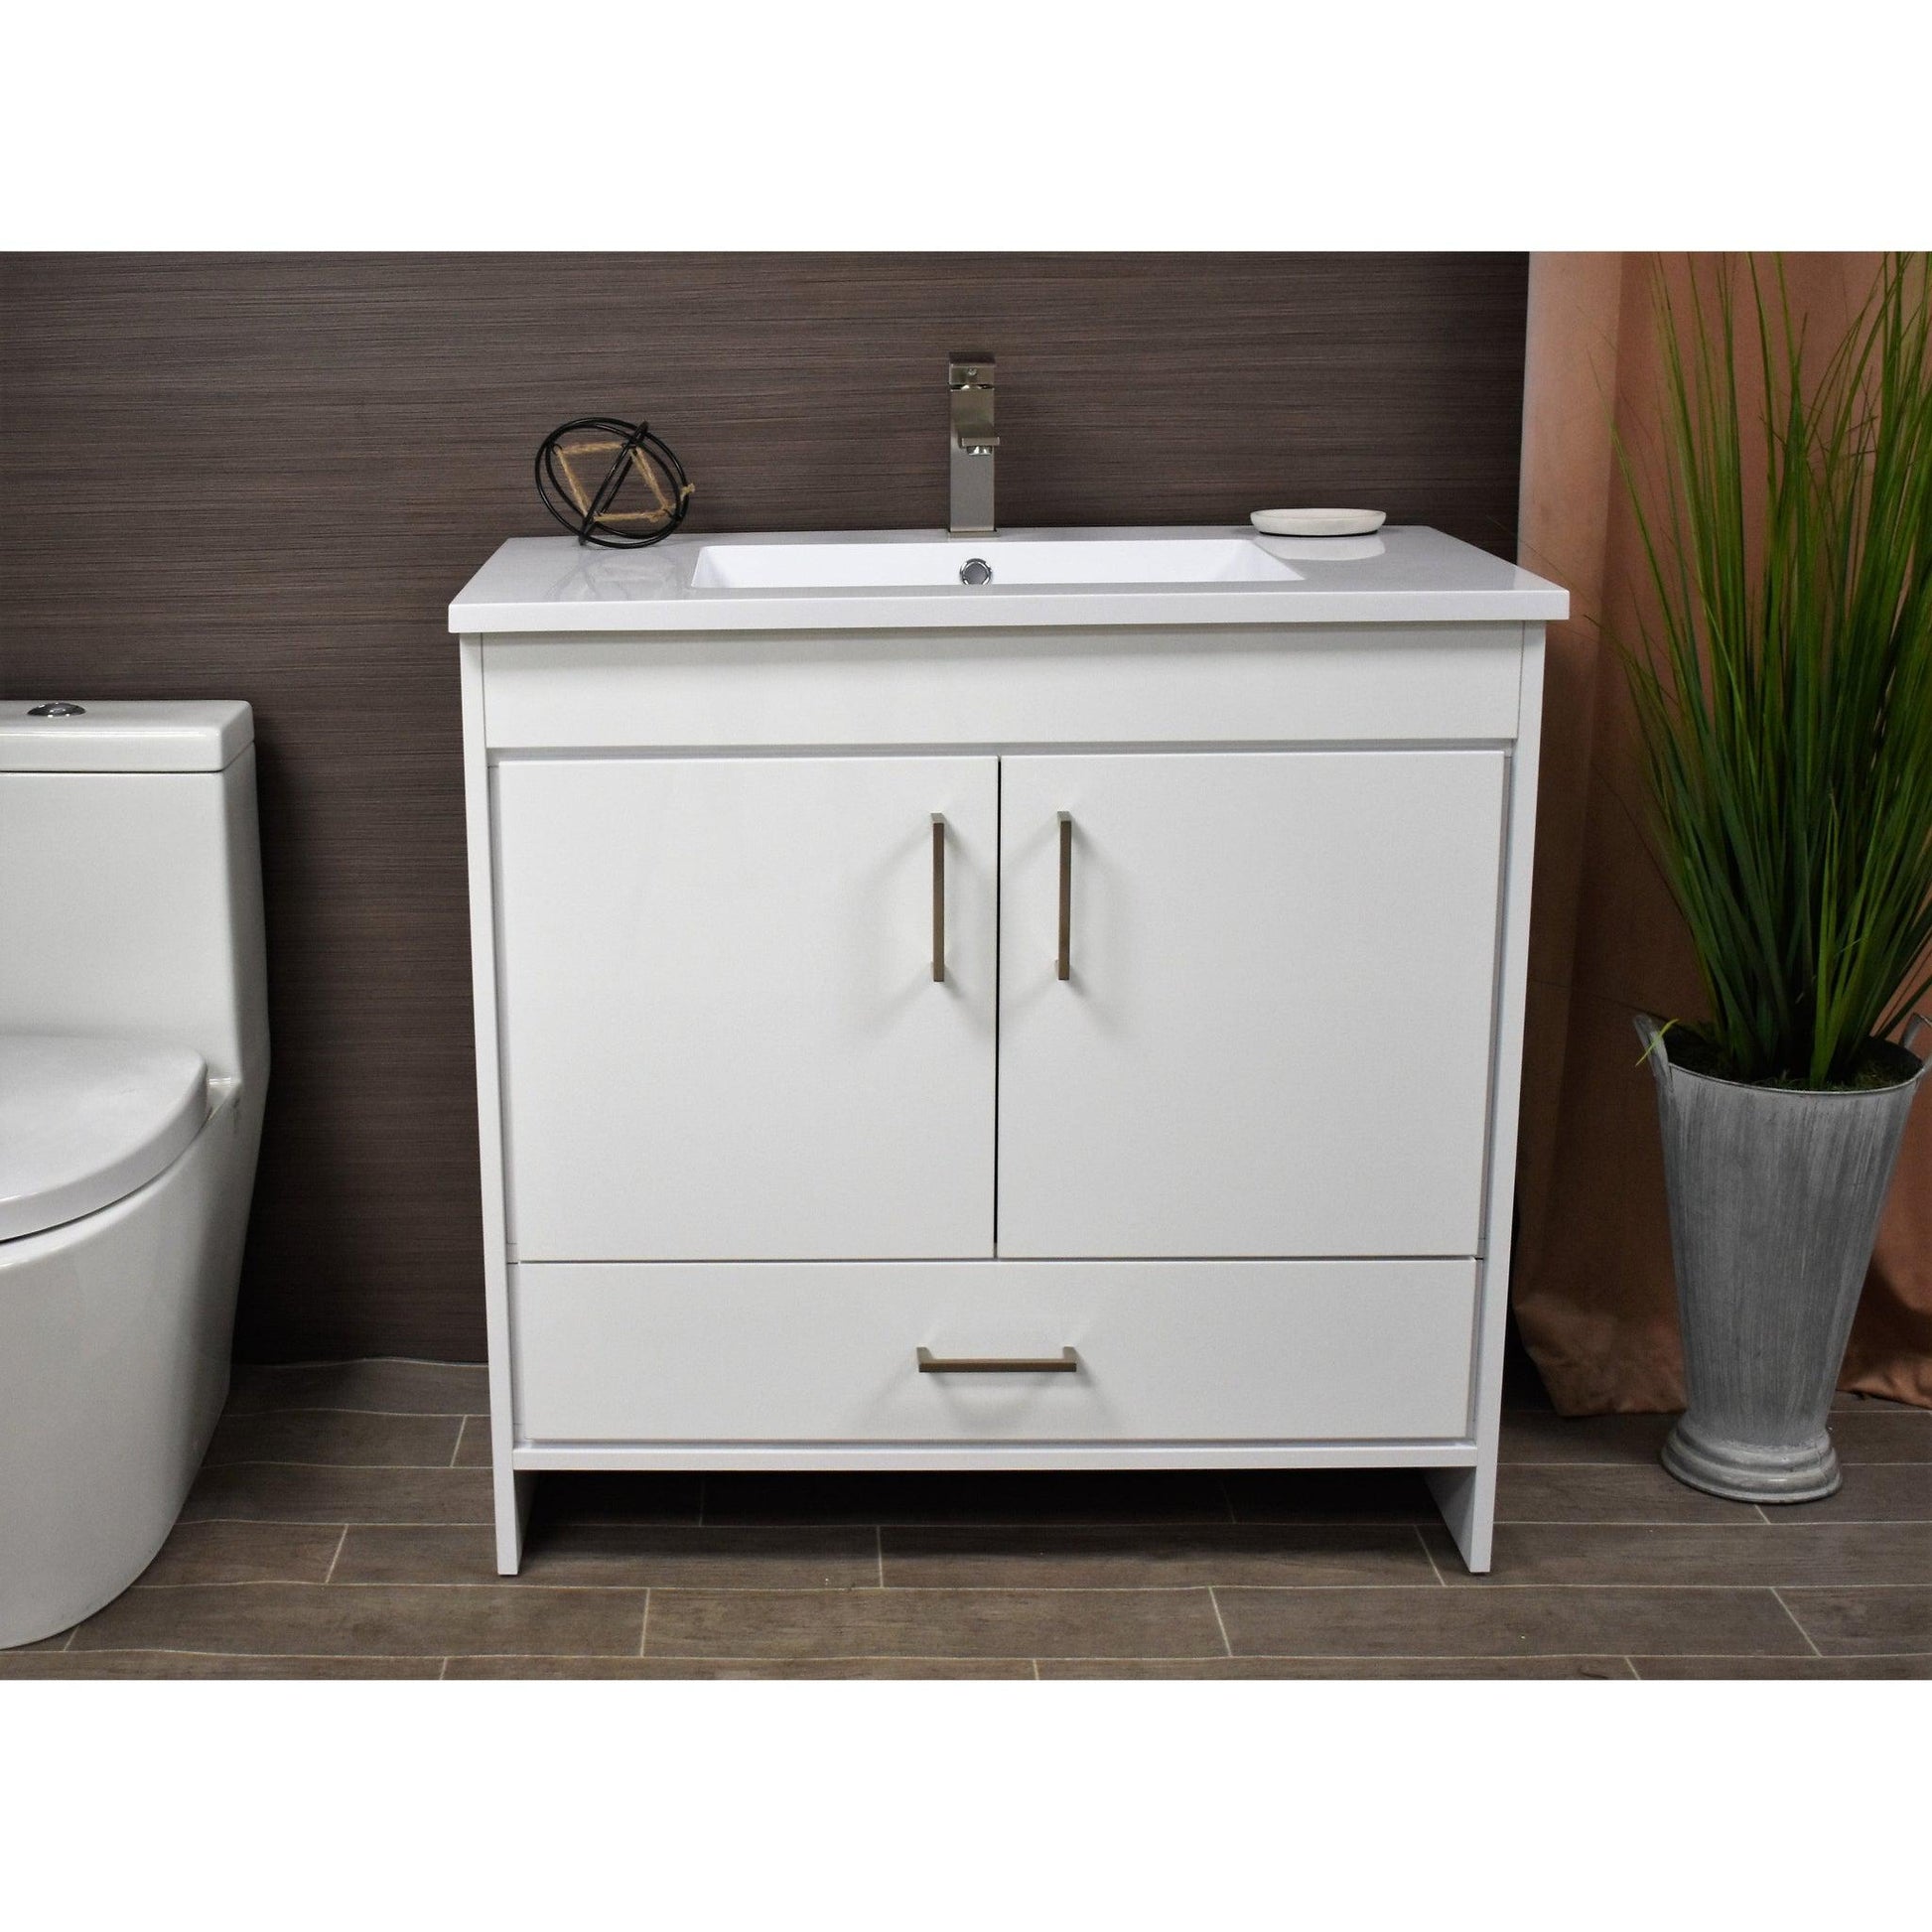 Volpa USA Rio 36" White Freestanding Modern Bathroom Vanity With Integrated Acrylic Top and Brushed Nickel Handles